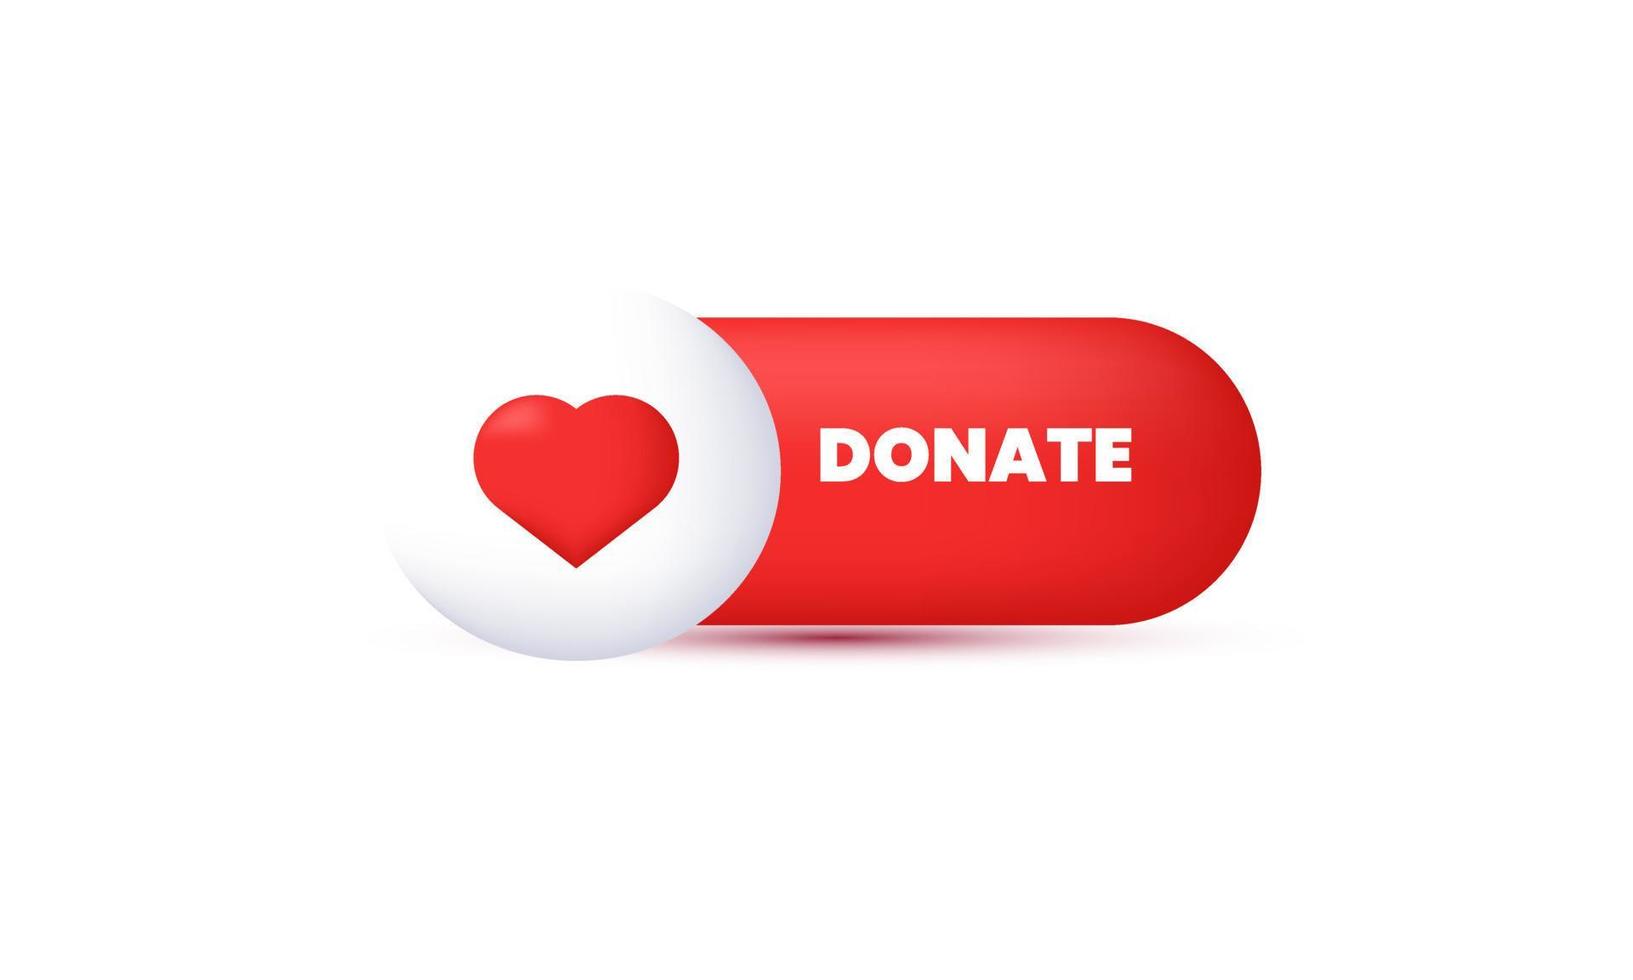 illustration icon 3d donate button heart shape red isolated on white background vector